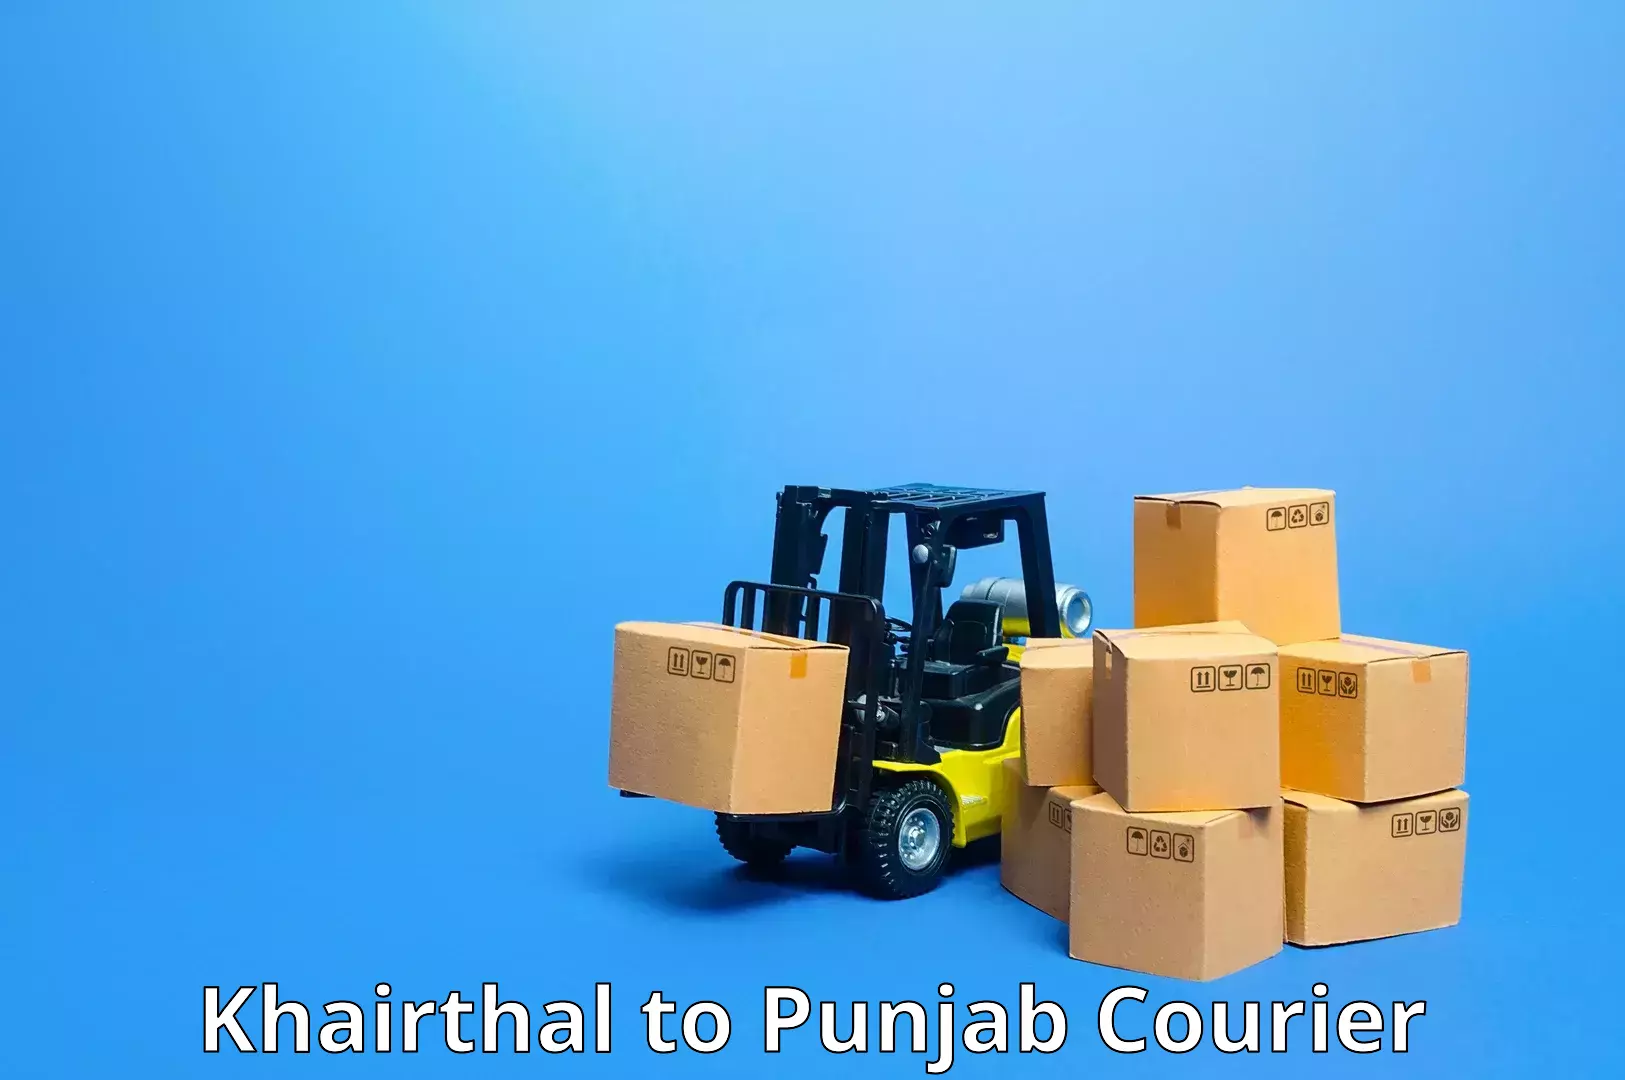 Reliable package handling Khairthal to Zirakpur